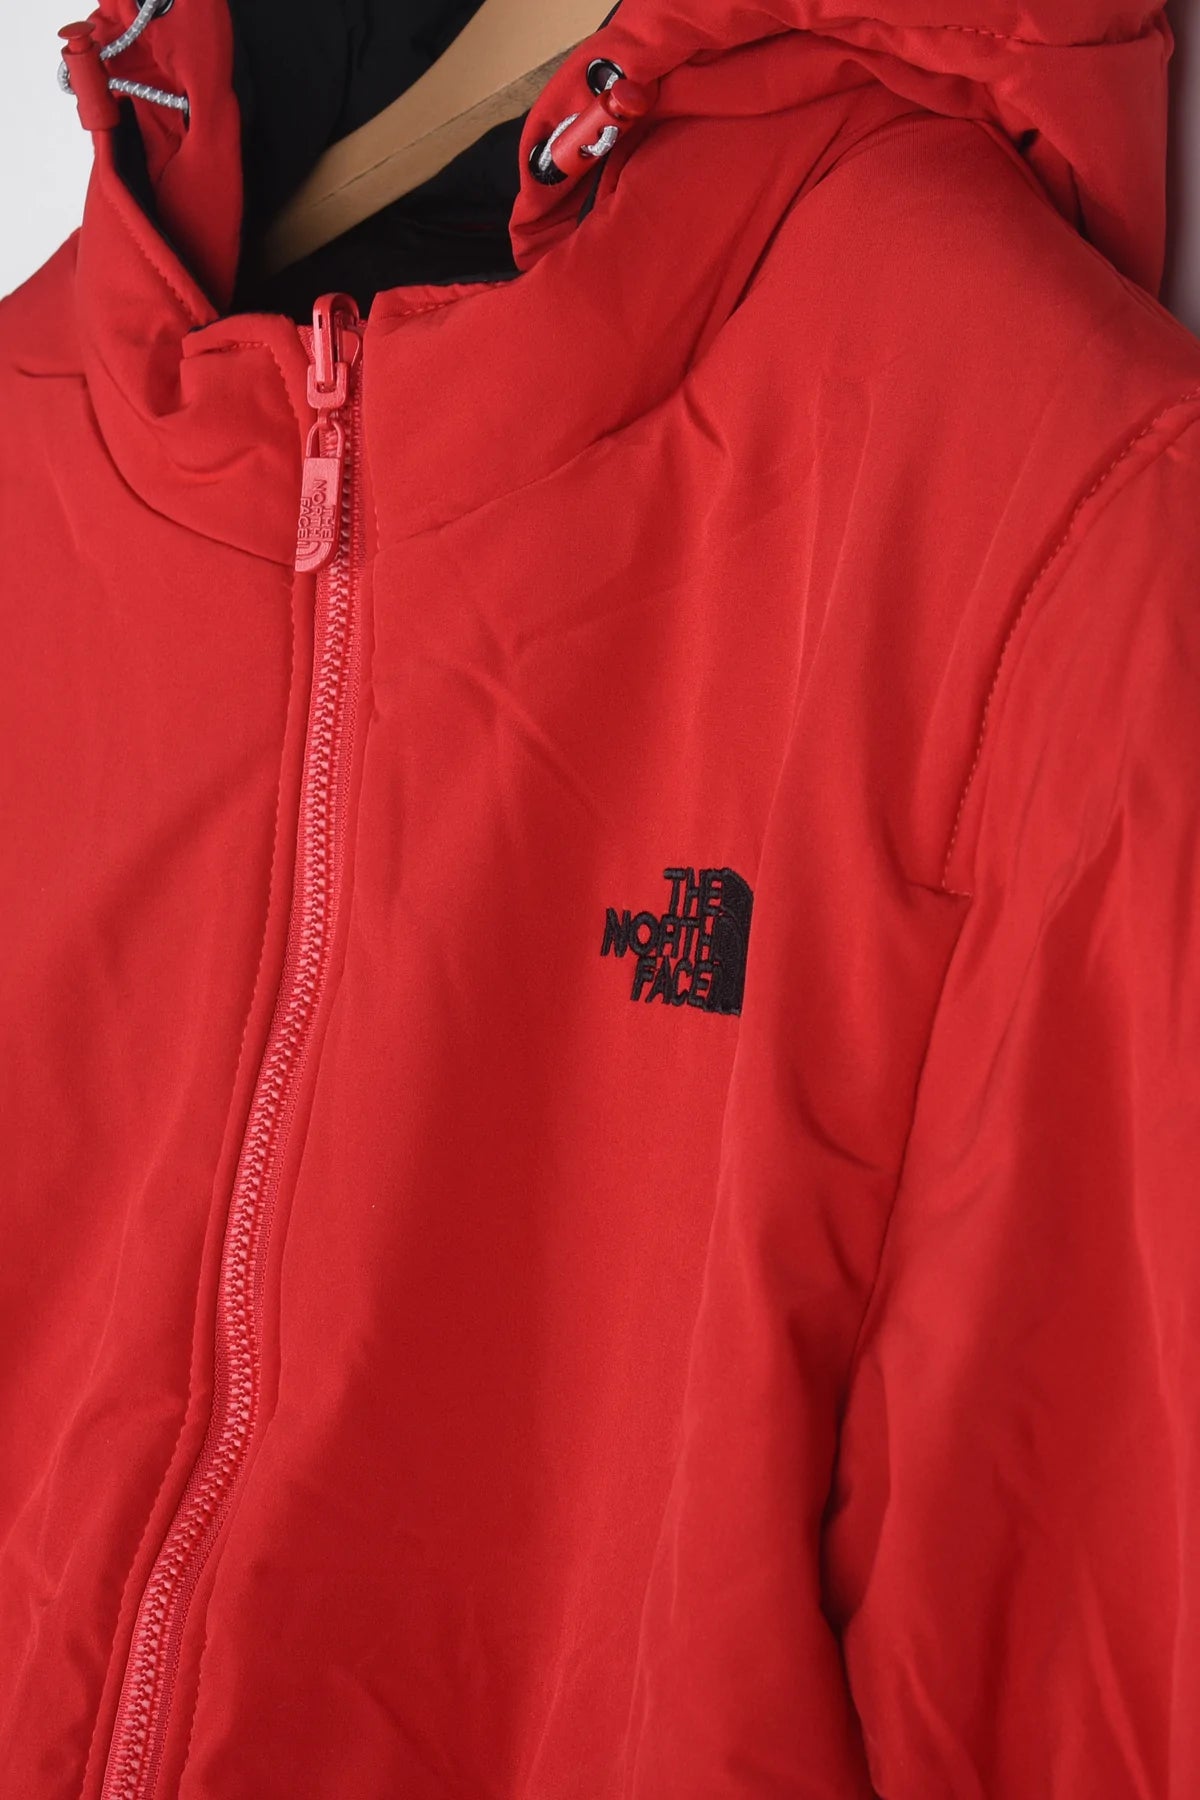 NRTH FC Reversible Red Imported Jacket (00266)